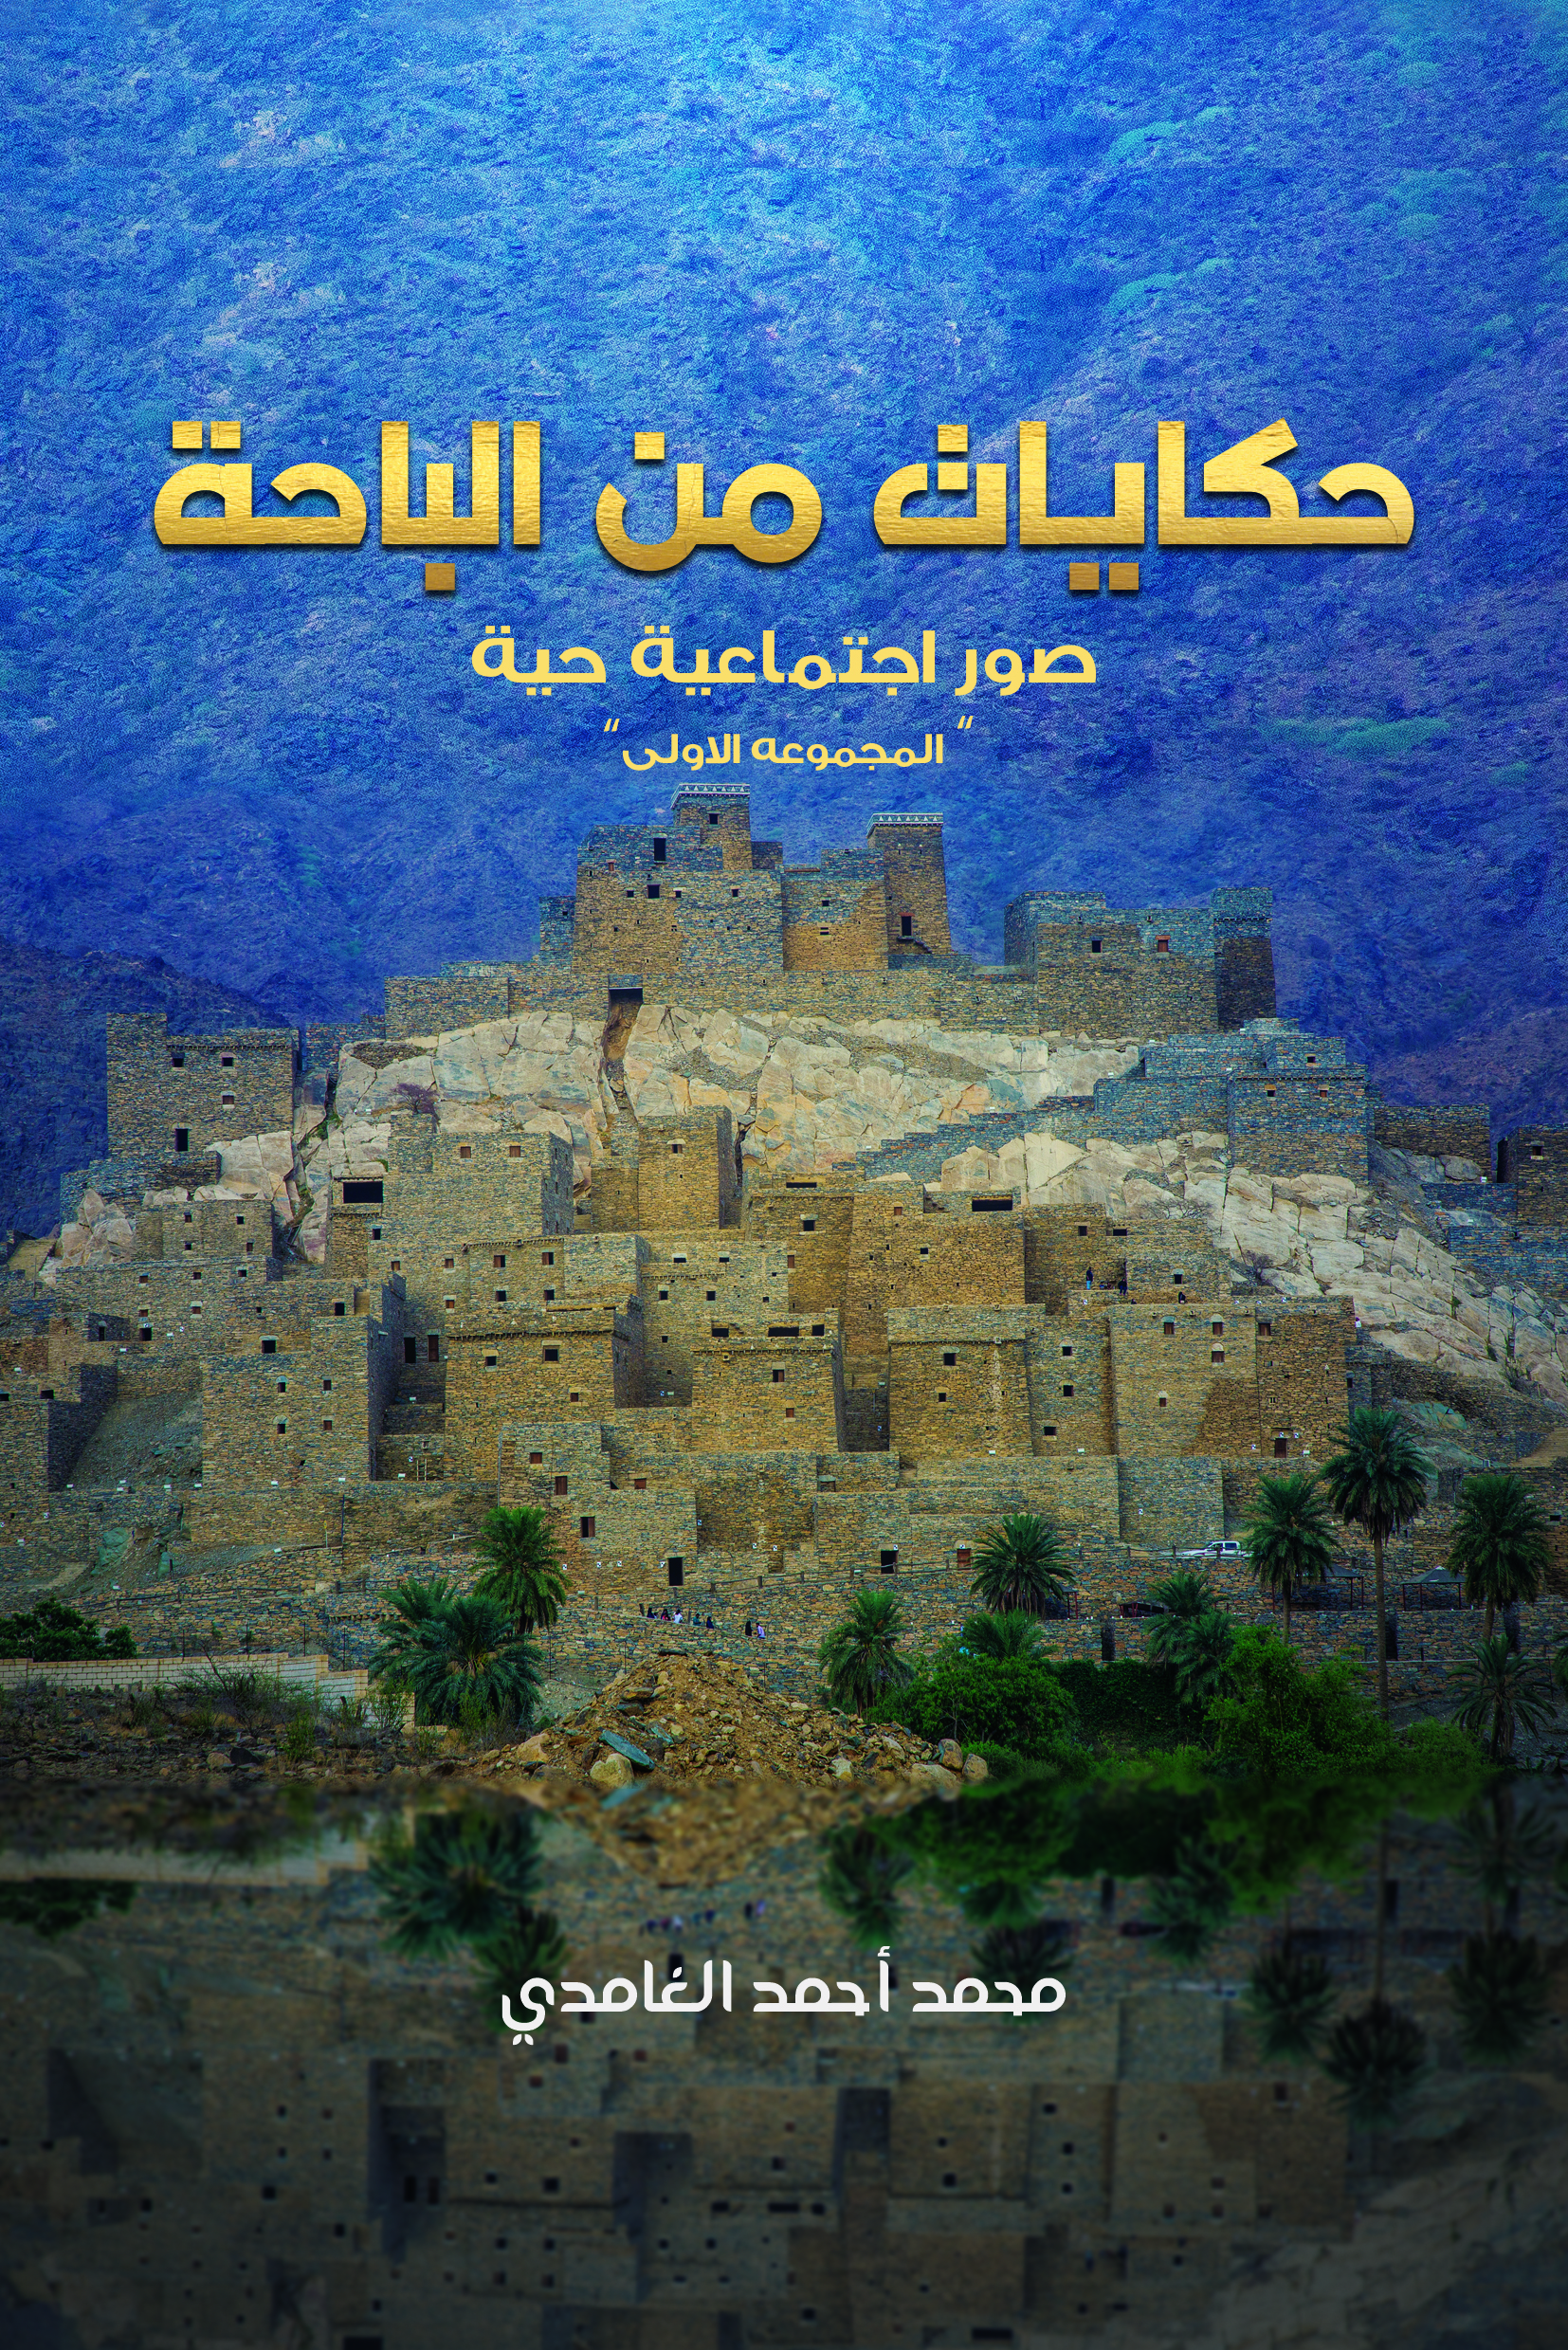 This image is the cover for the book حكايات من الباحة